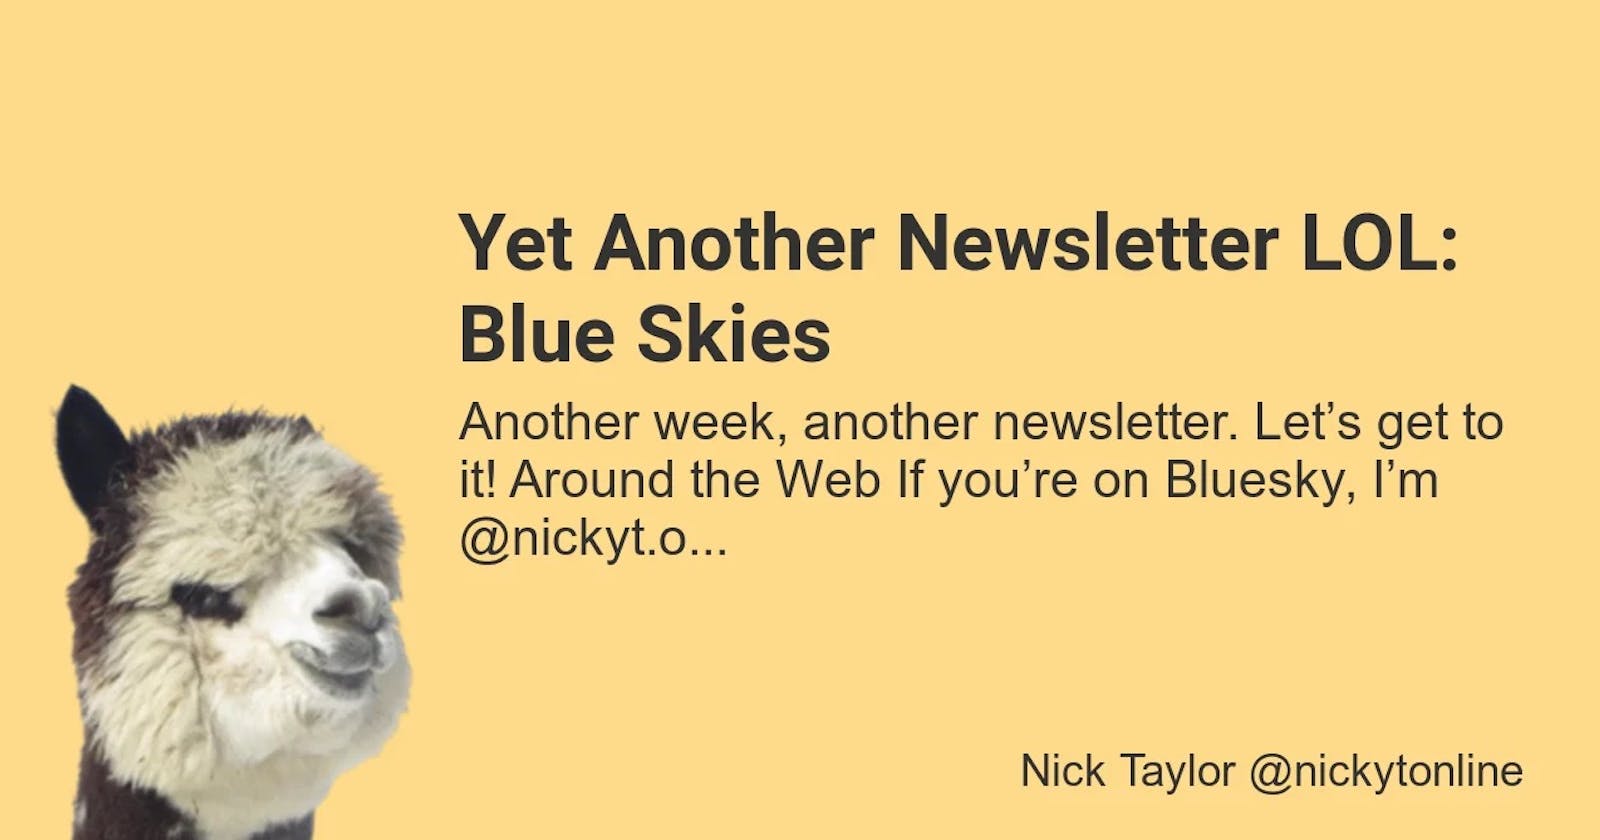 Yet Another Newsletter LOL: Blue Skies